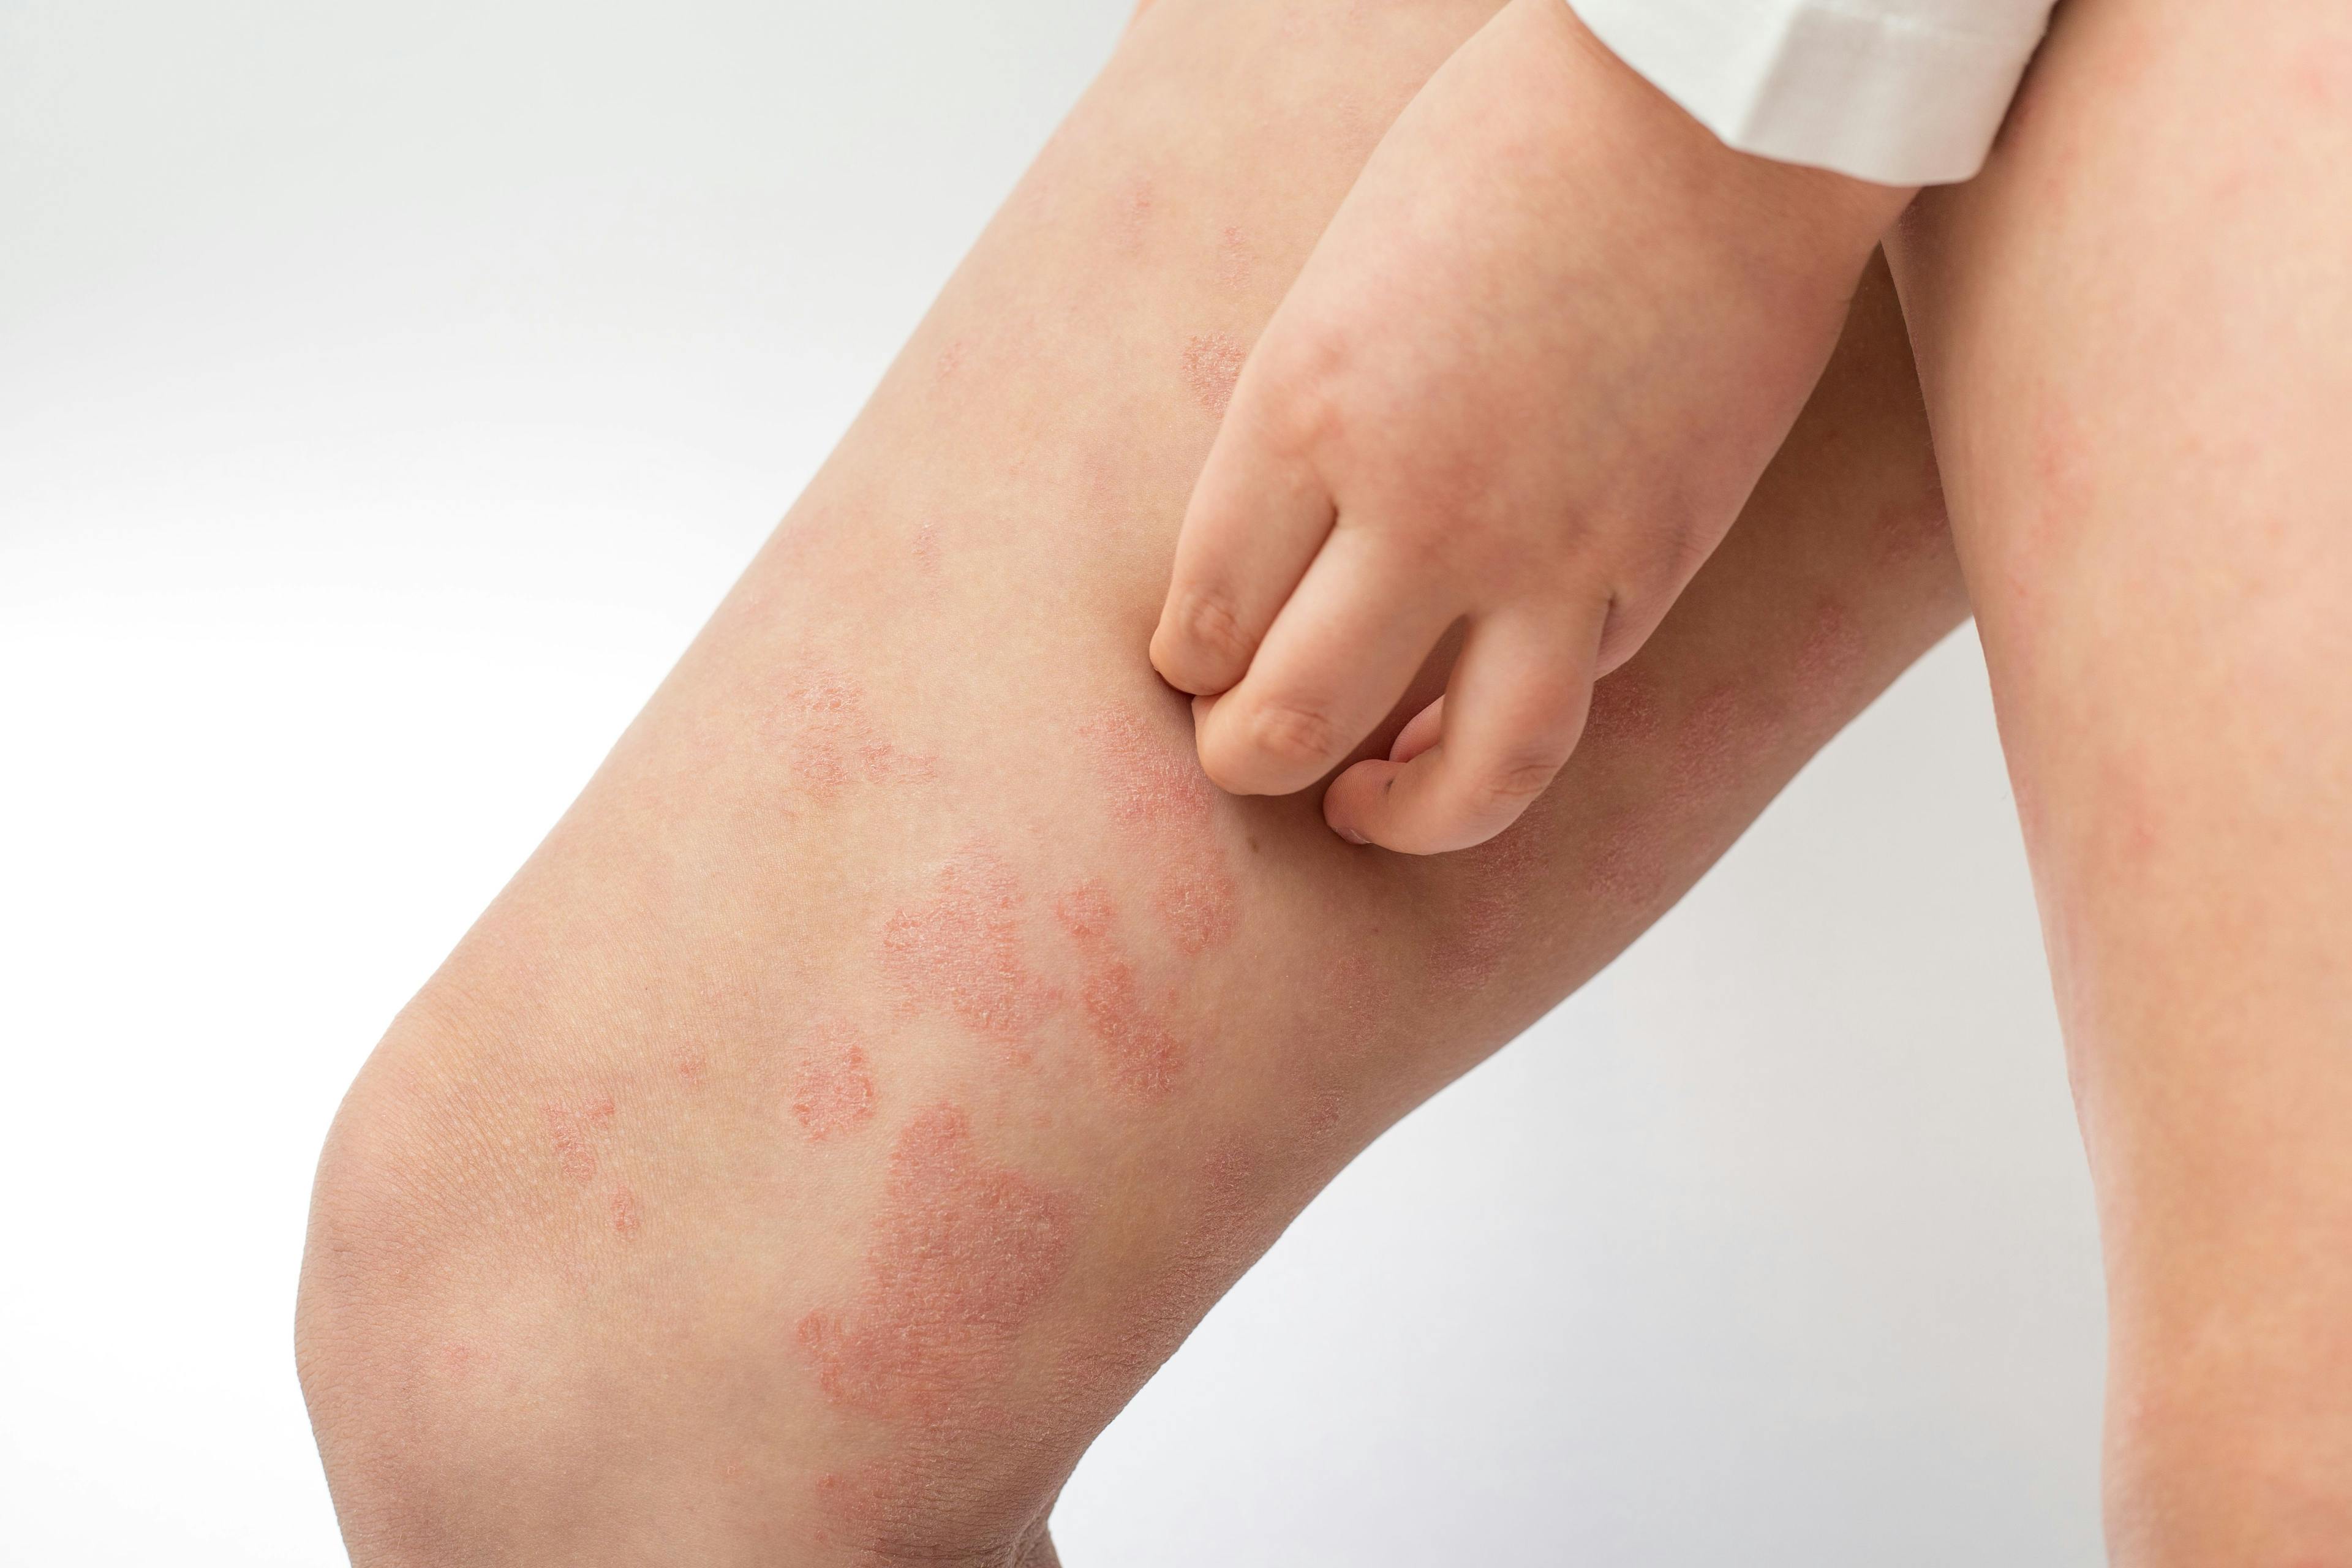 Ixekizumab Yields Early, Sustained Improvements to Quality of Life Measures in Pediatric Patients With Plaque Psoriasis